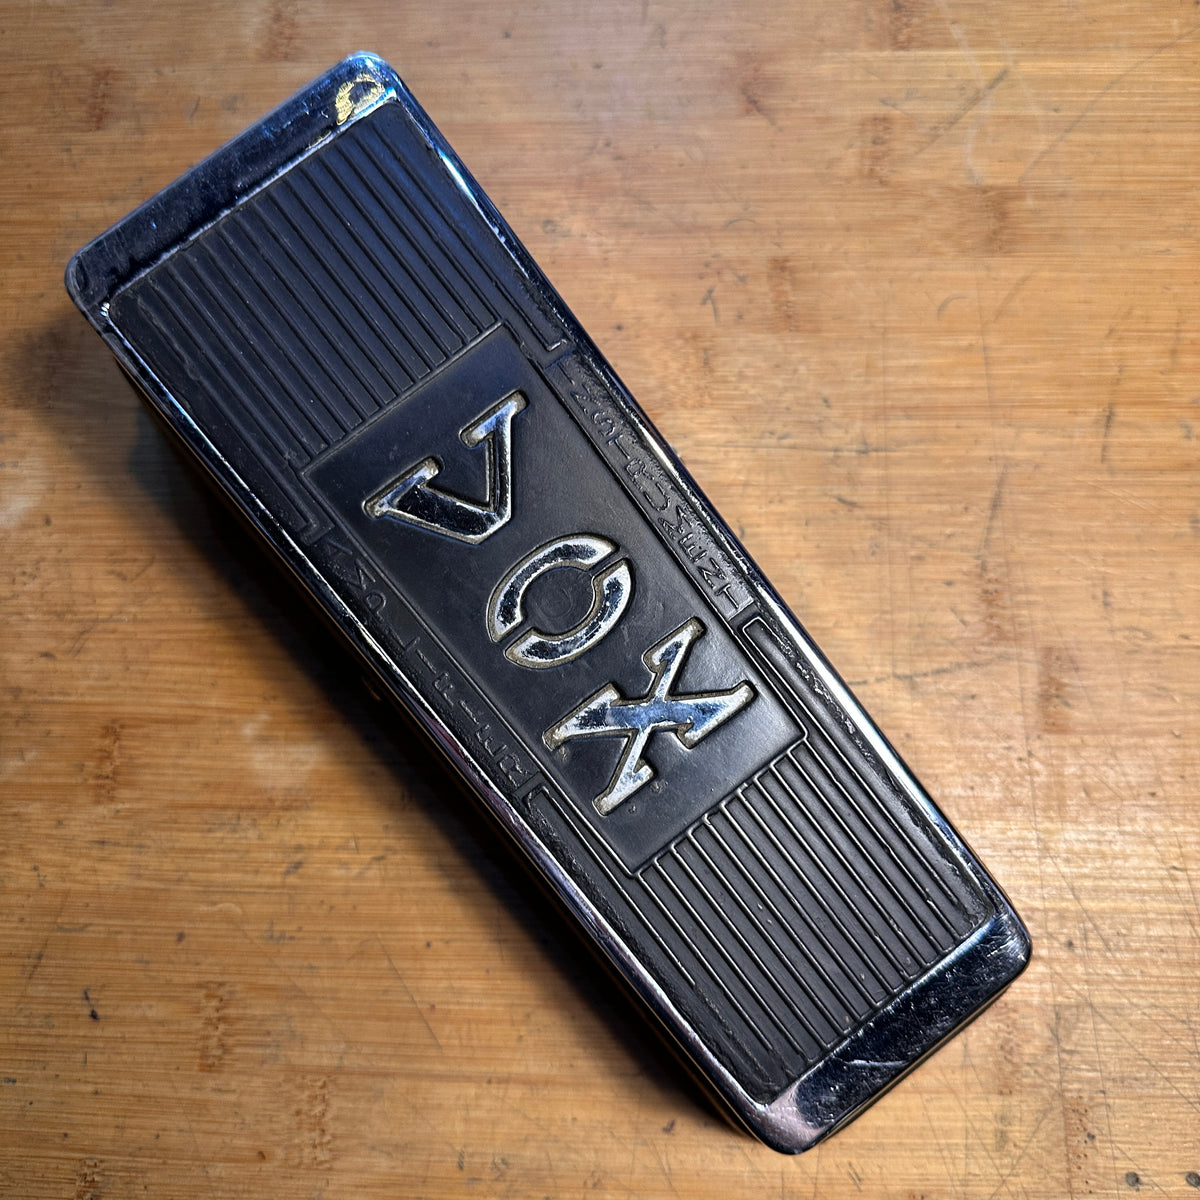 Vox V847 Wah Pedal - Made in USA - Preowned